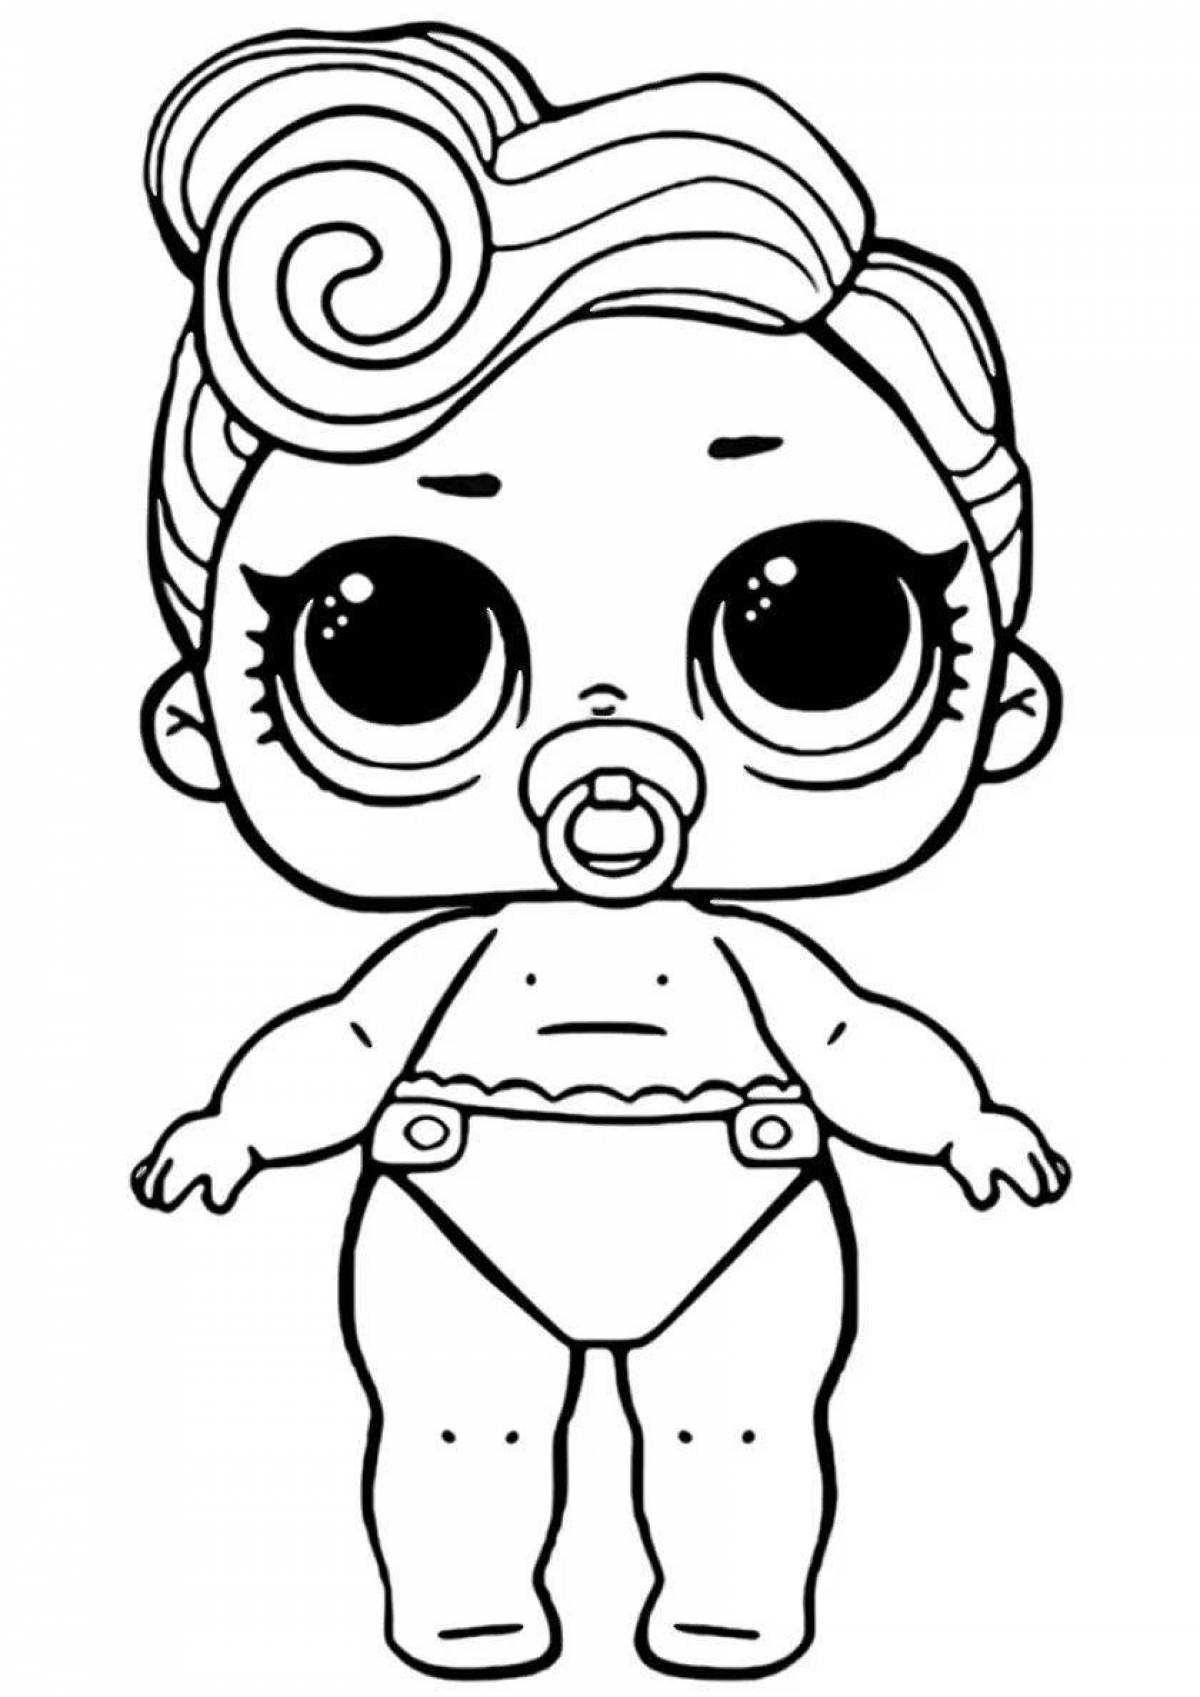 Sparkling loo coloring page